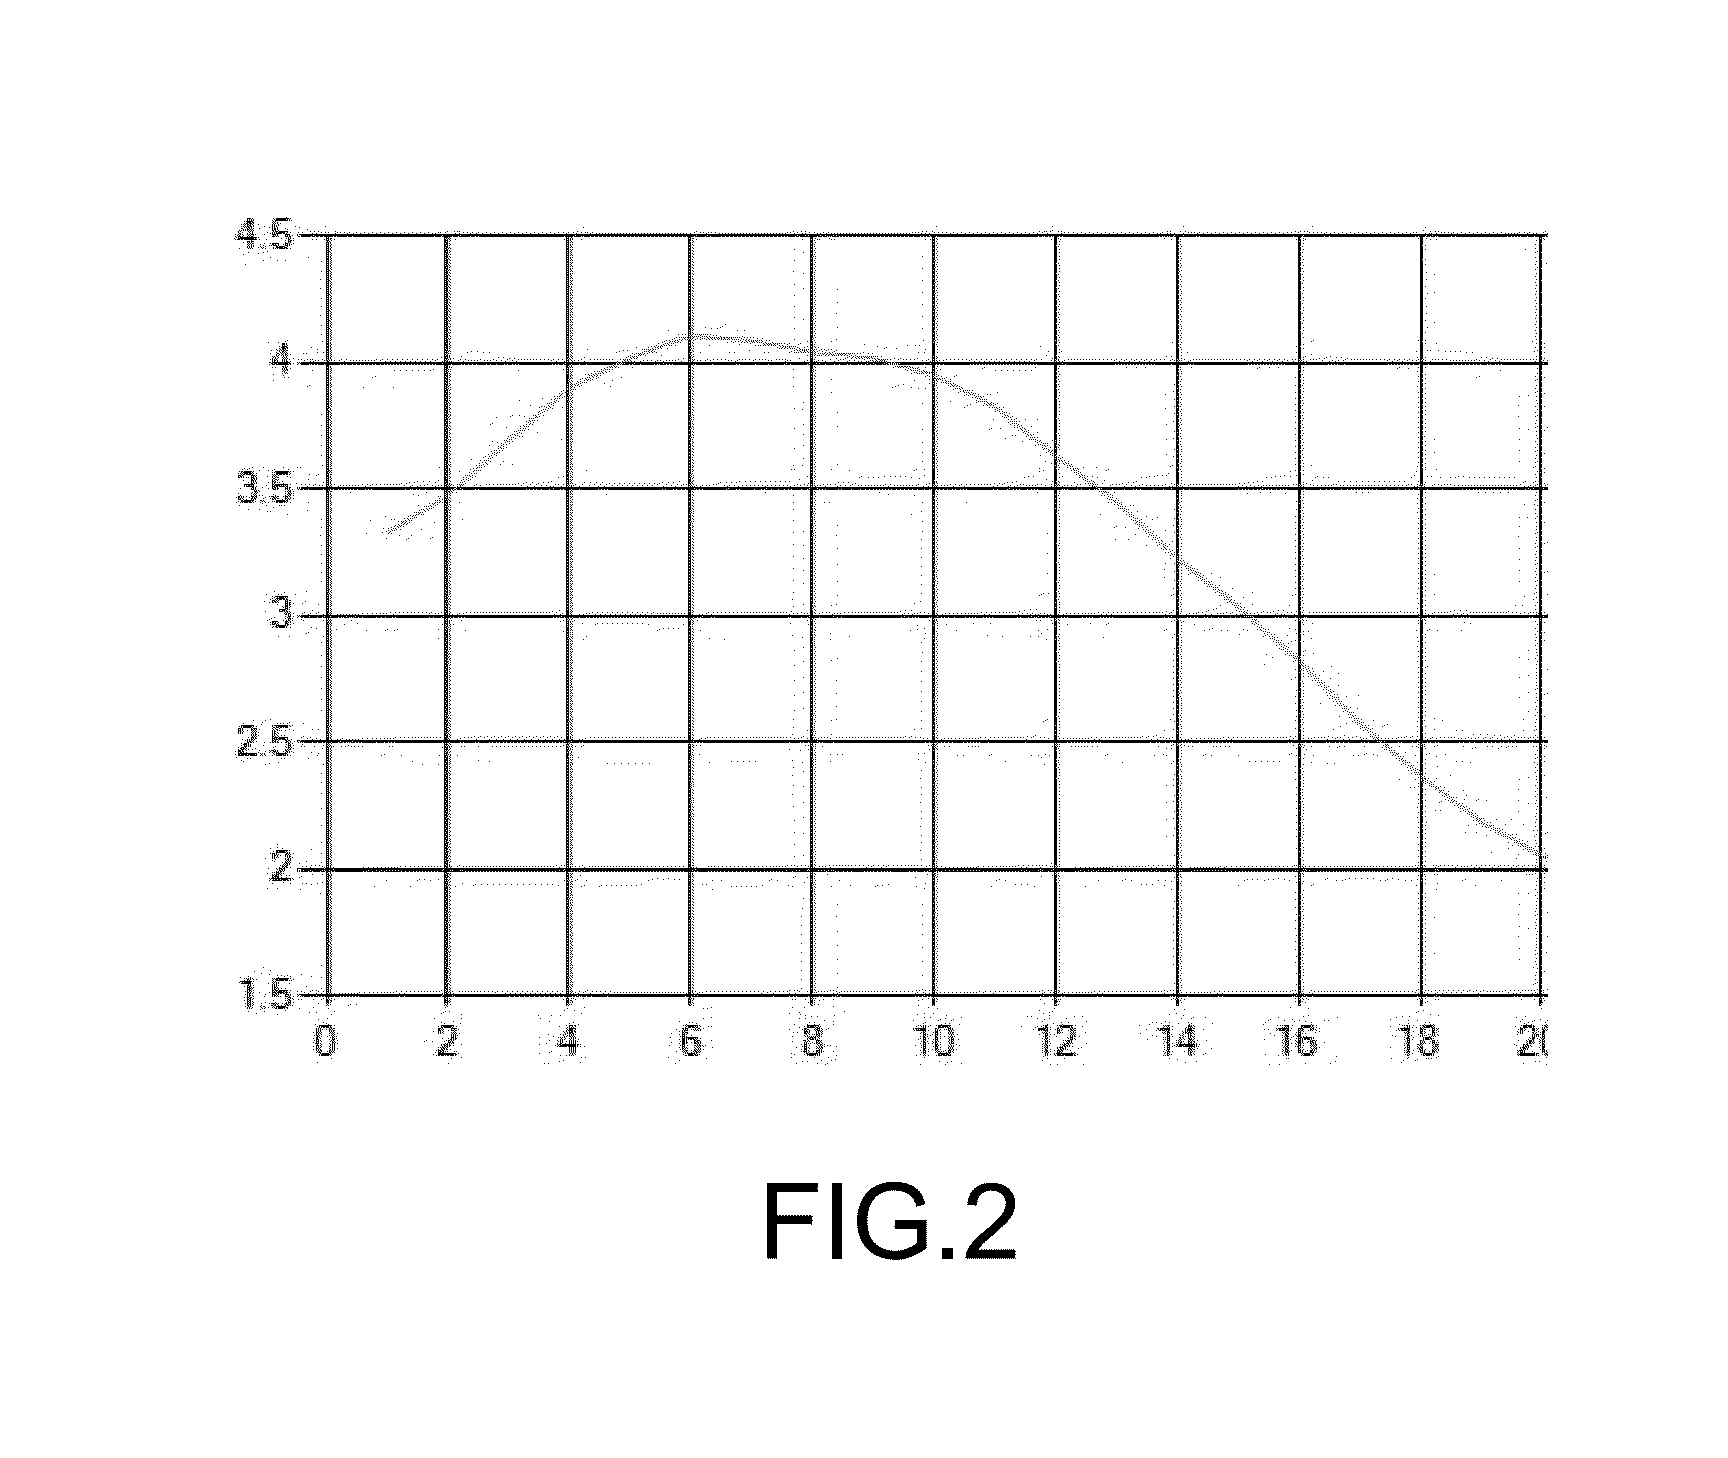 Automated re-focusing of interferometric reference mirror